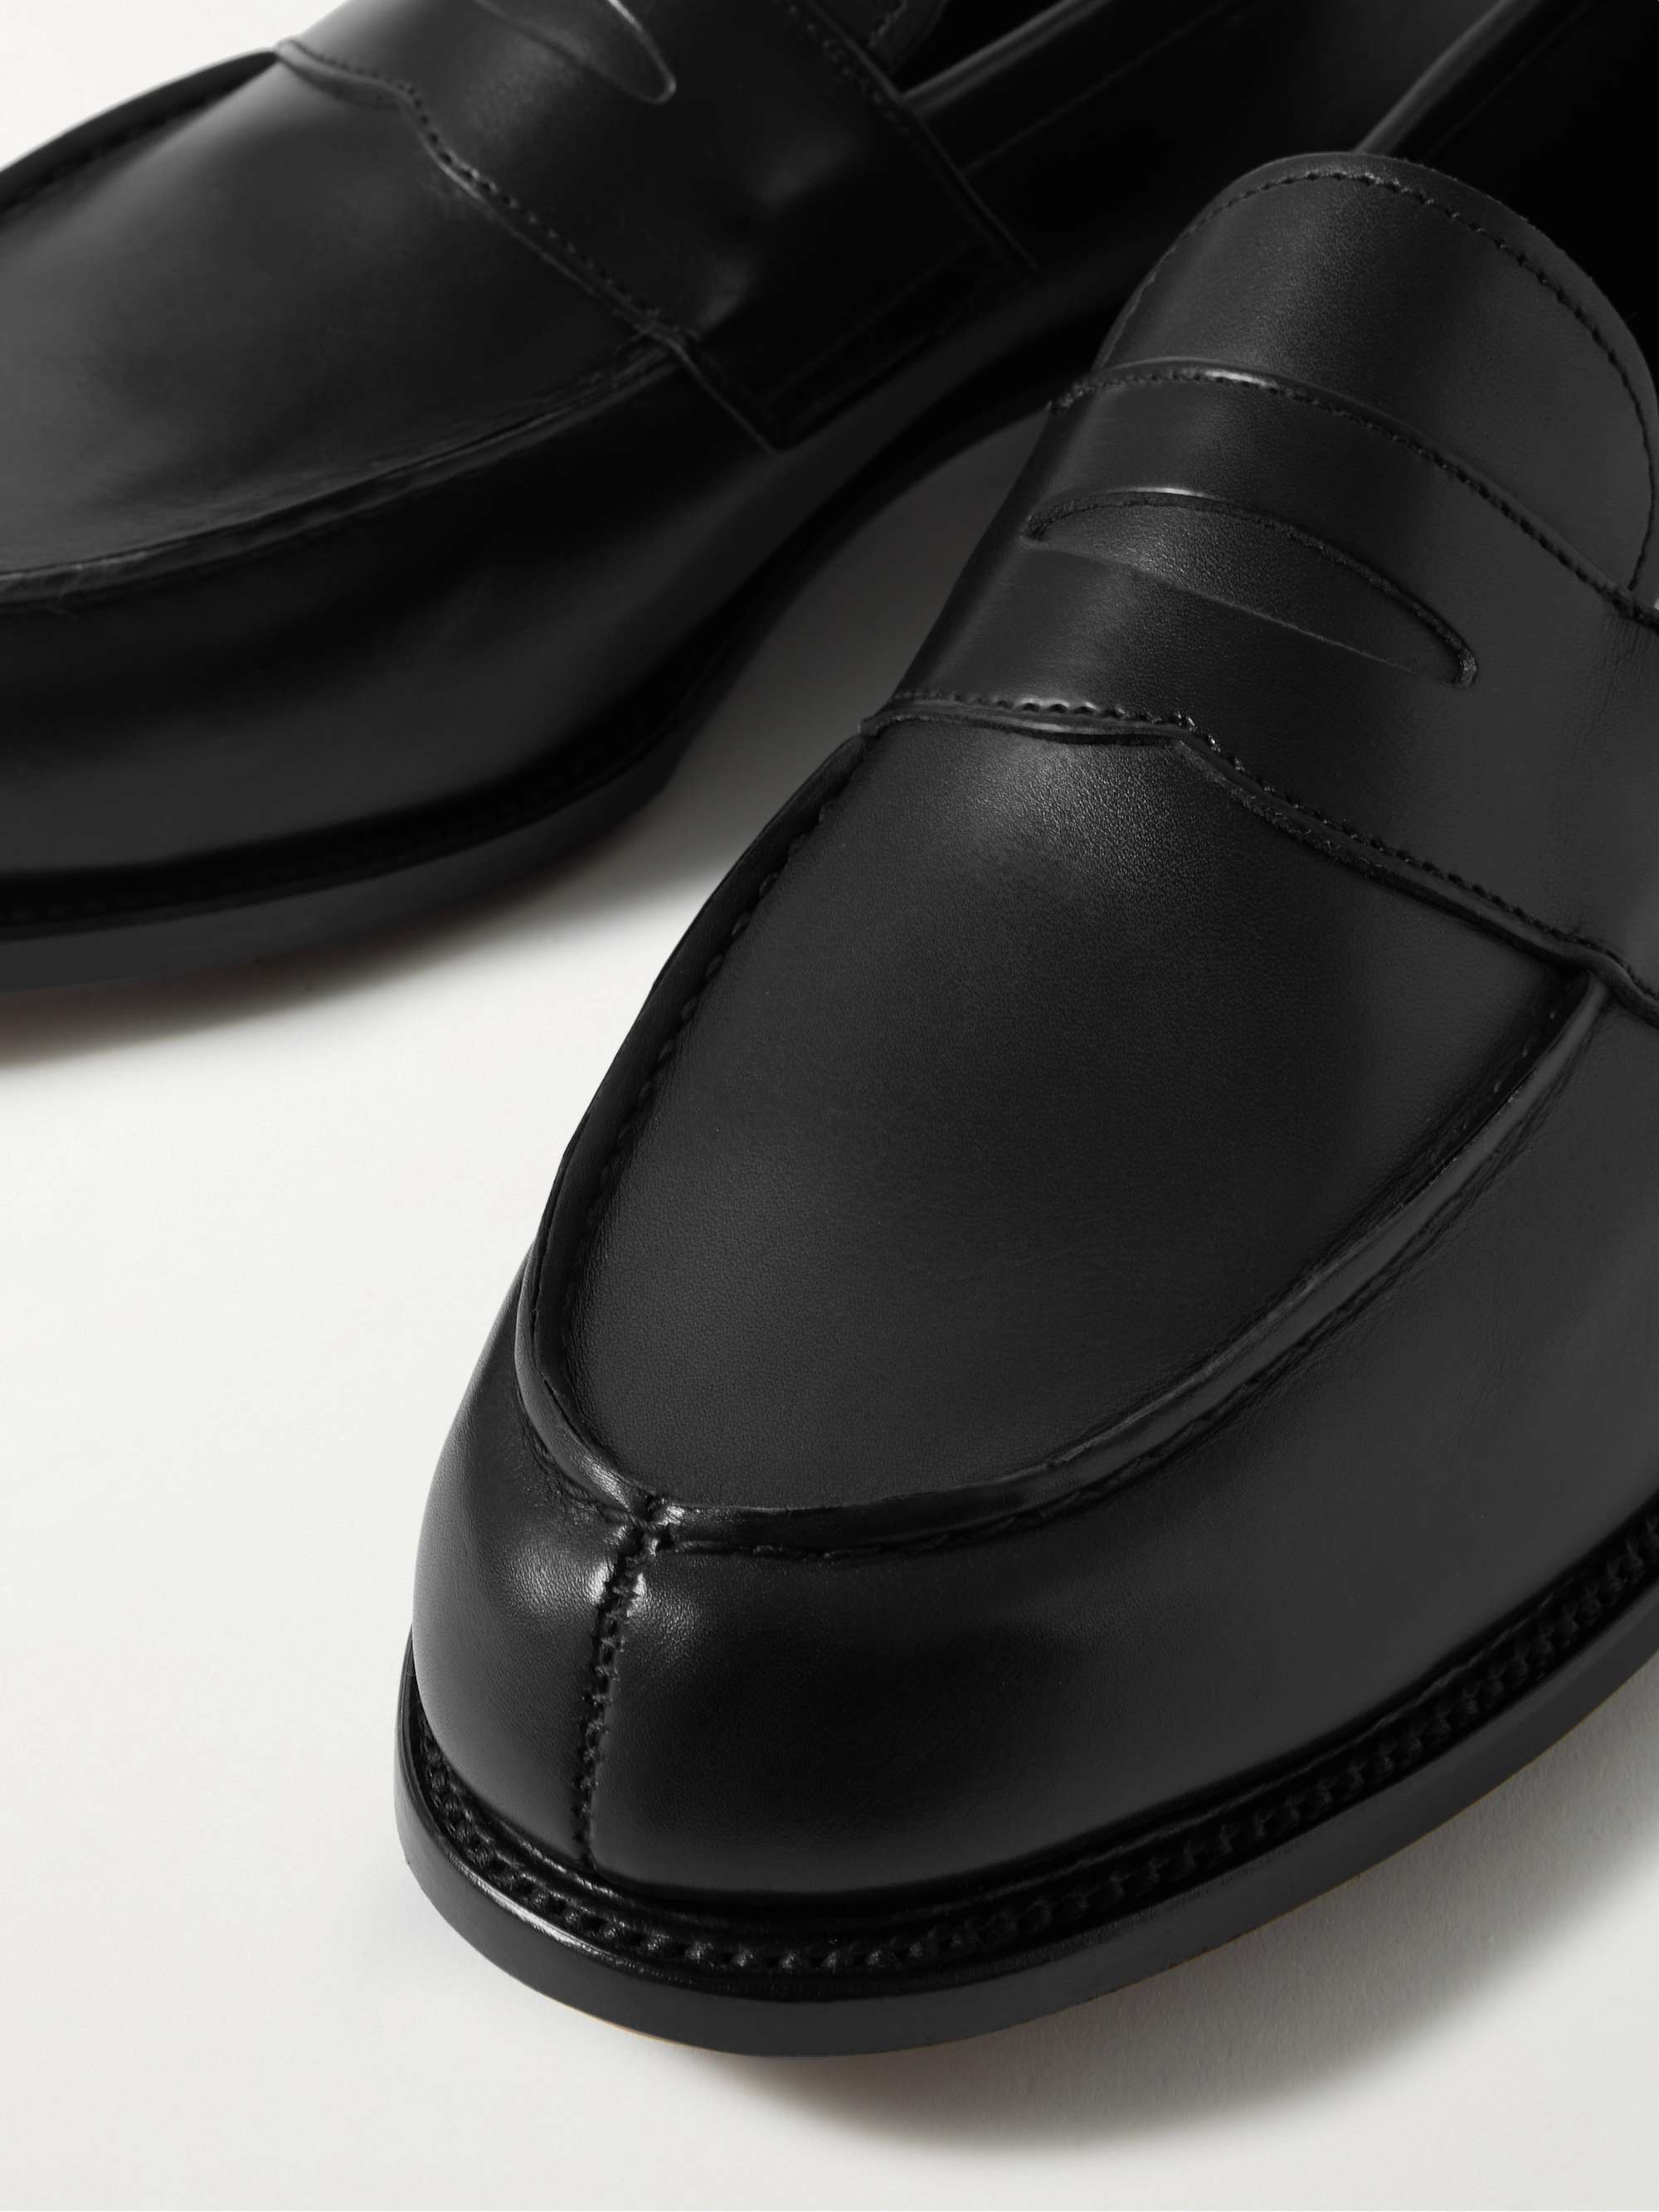 GEORGE CLEVERLEY Cannes Leather Penny Loafers